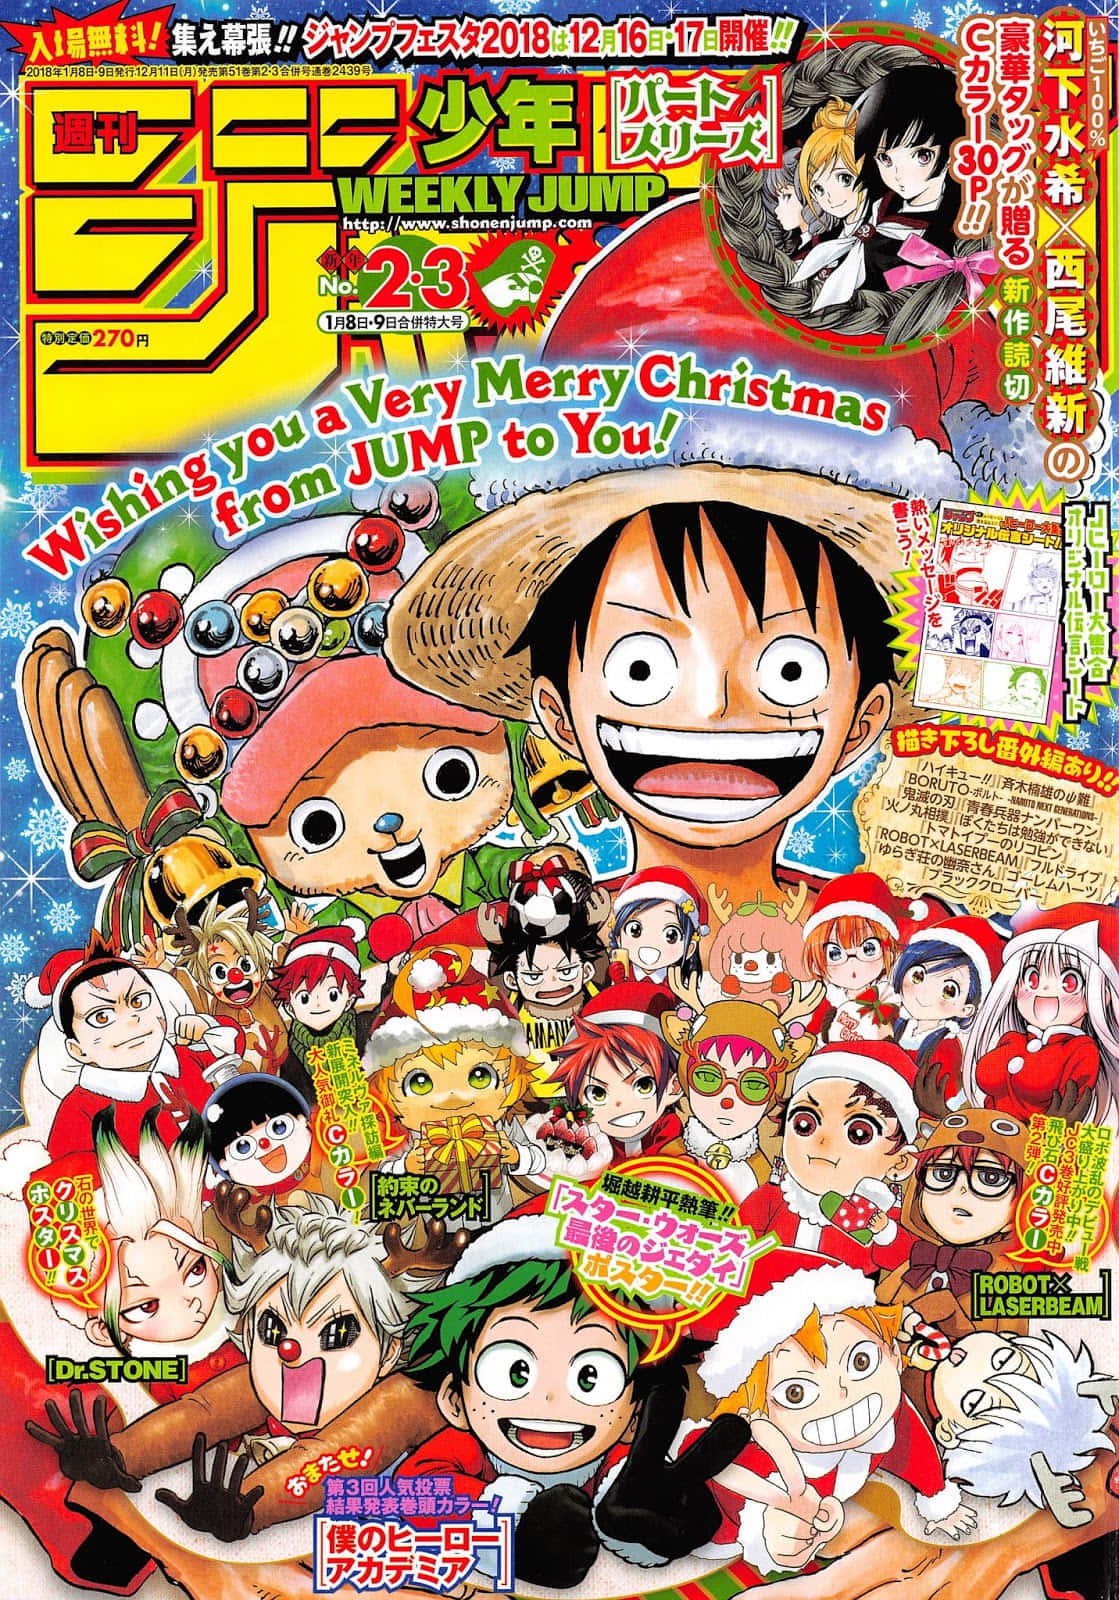 The best stories, the most exciting adventures, available every week in Shonen Jump!" Wallpaper